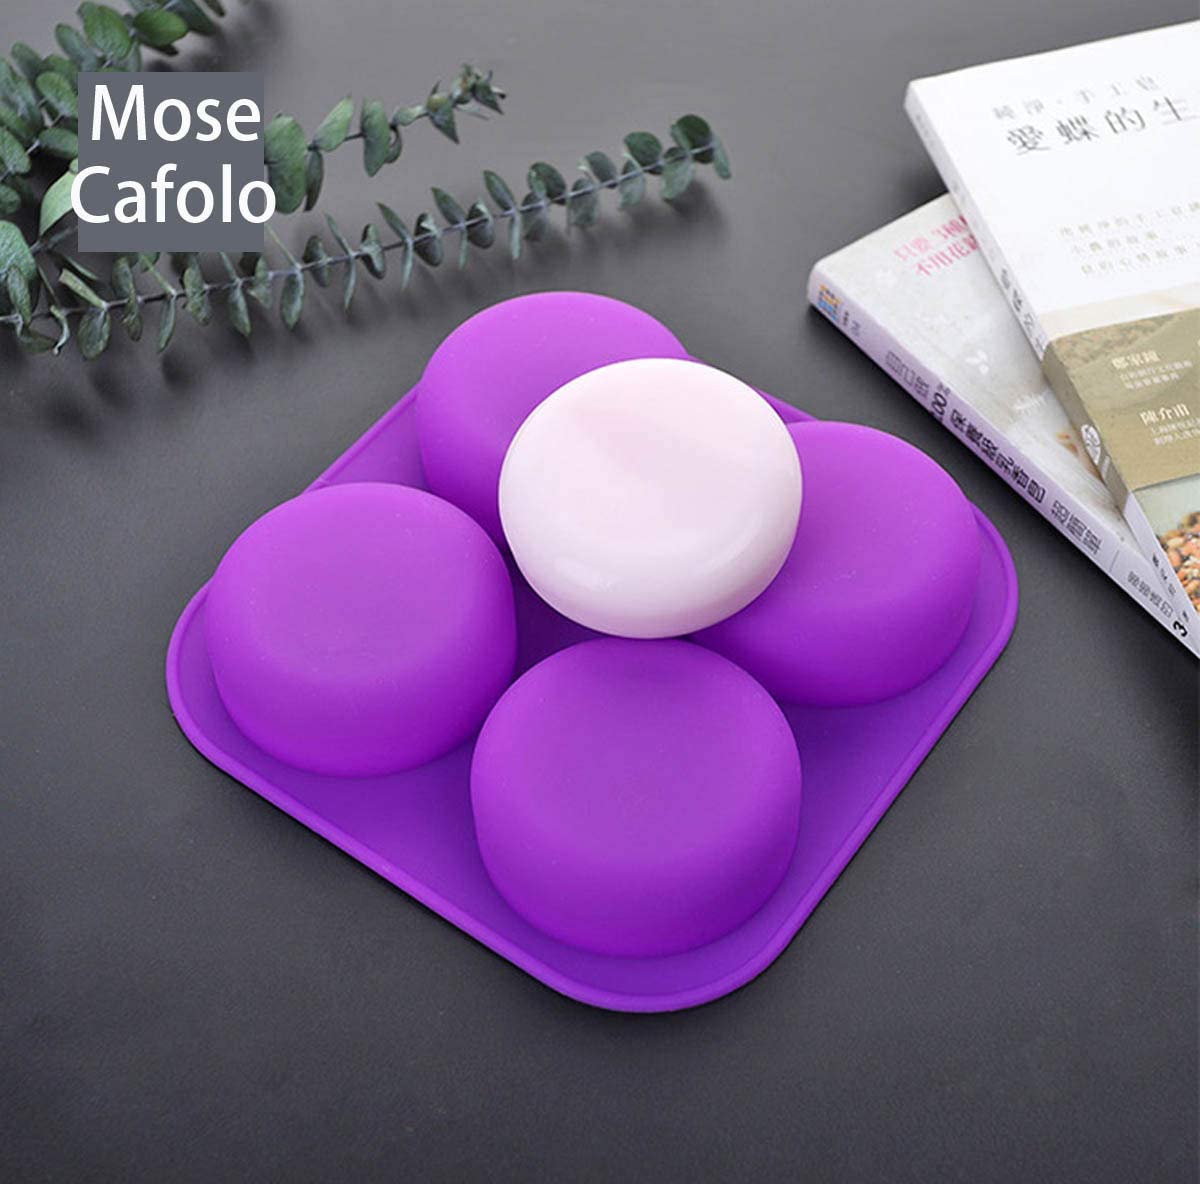 2 Pcs Glossy Silicone Molds 4 Cavity Round Shaped Mold for DIY